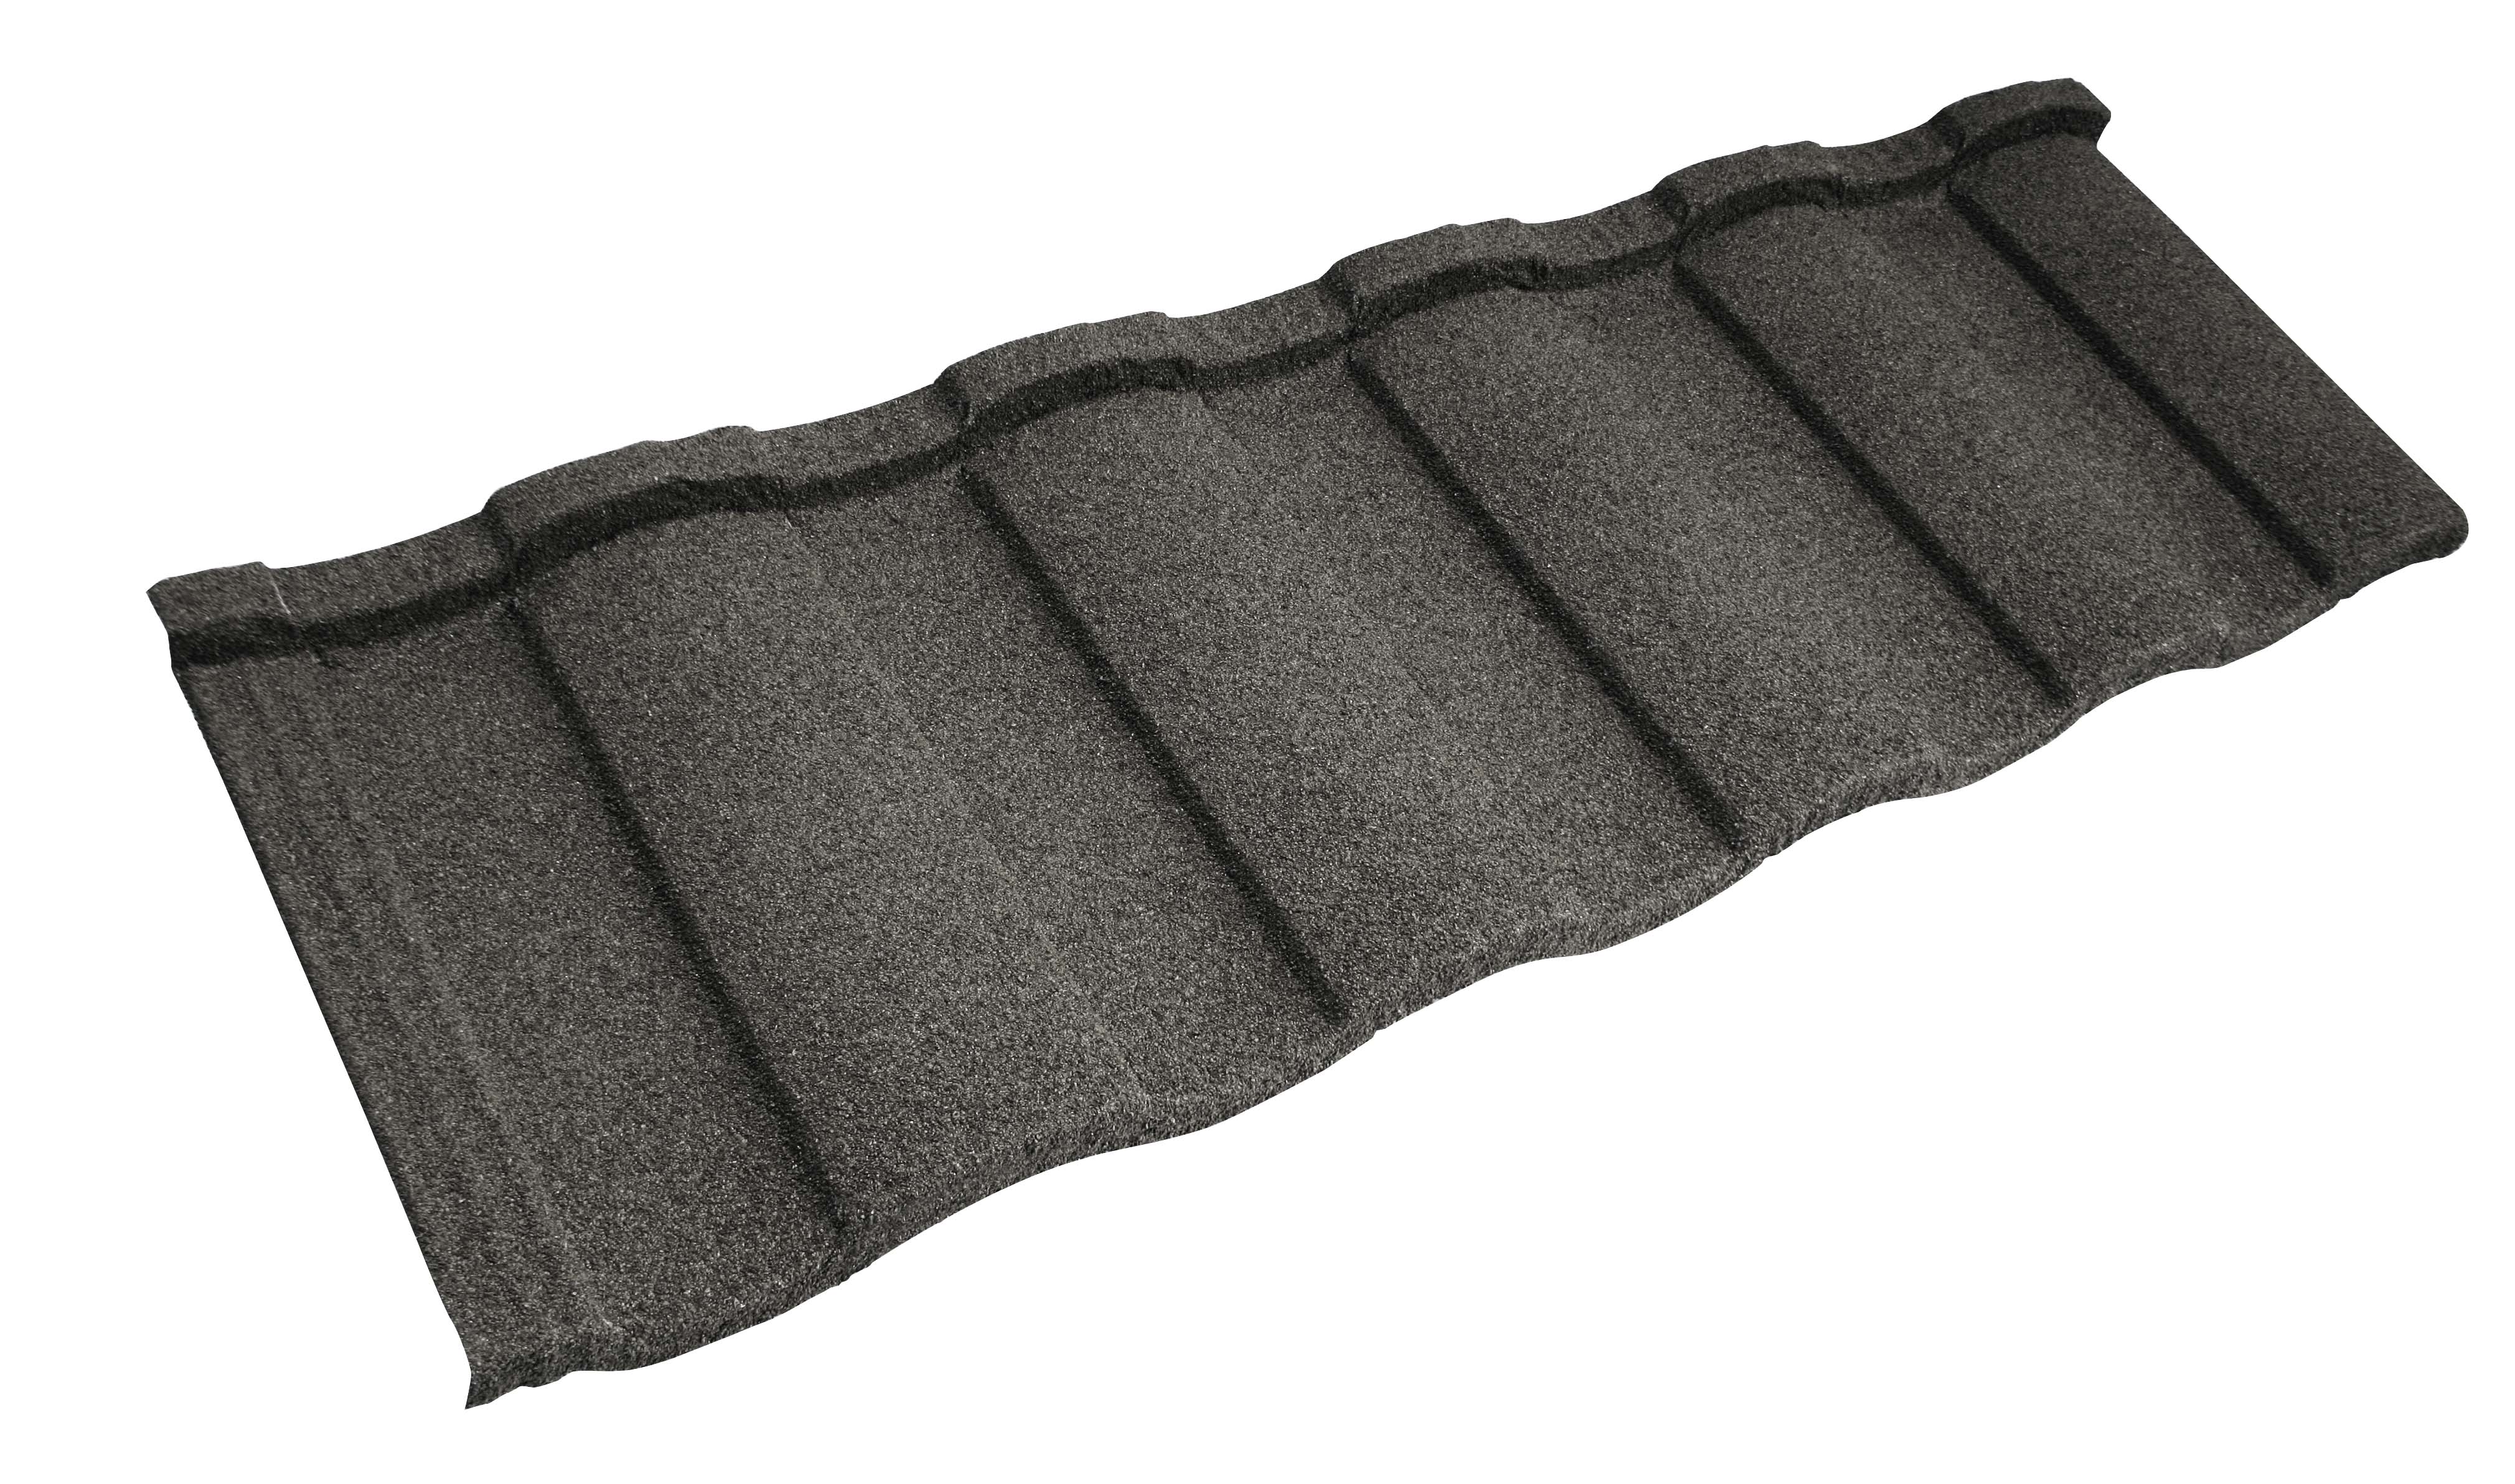 Metrotile Roman Roofing Tile in Charcoal